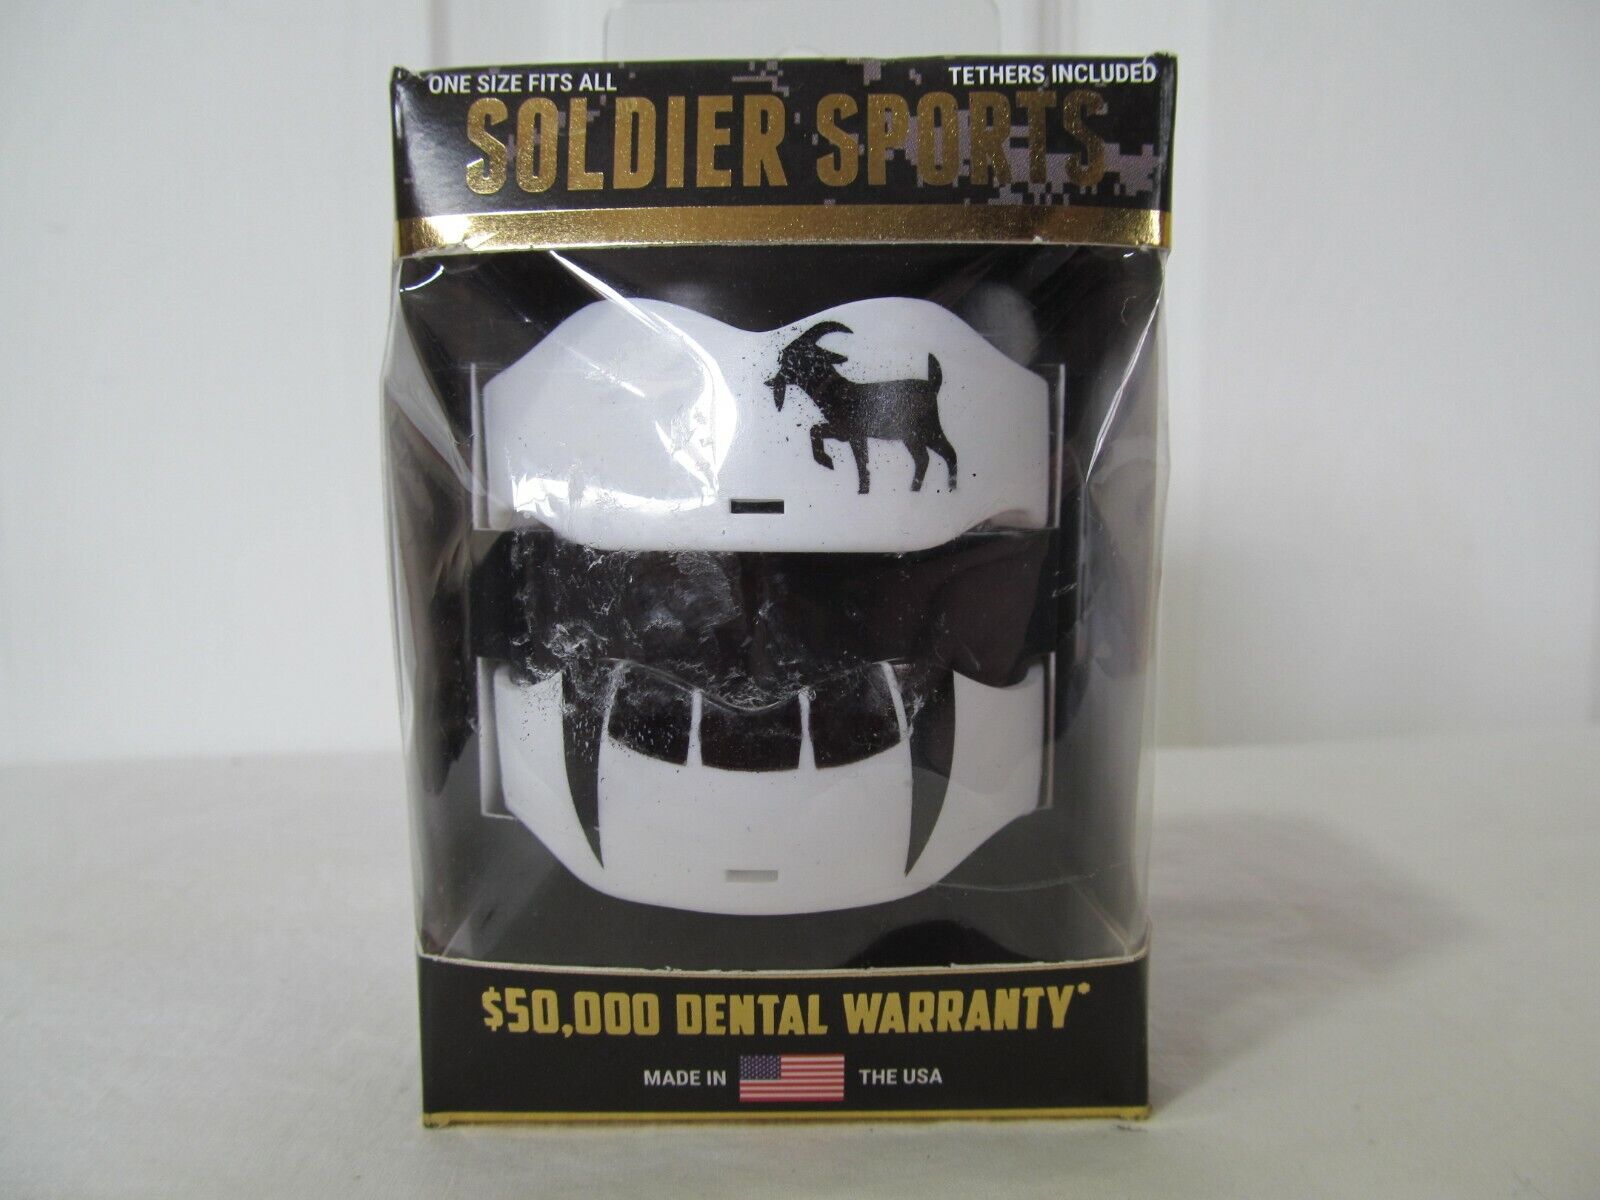 Nib soldier sports custom all sports pc goat fangs mouth guard lip protector